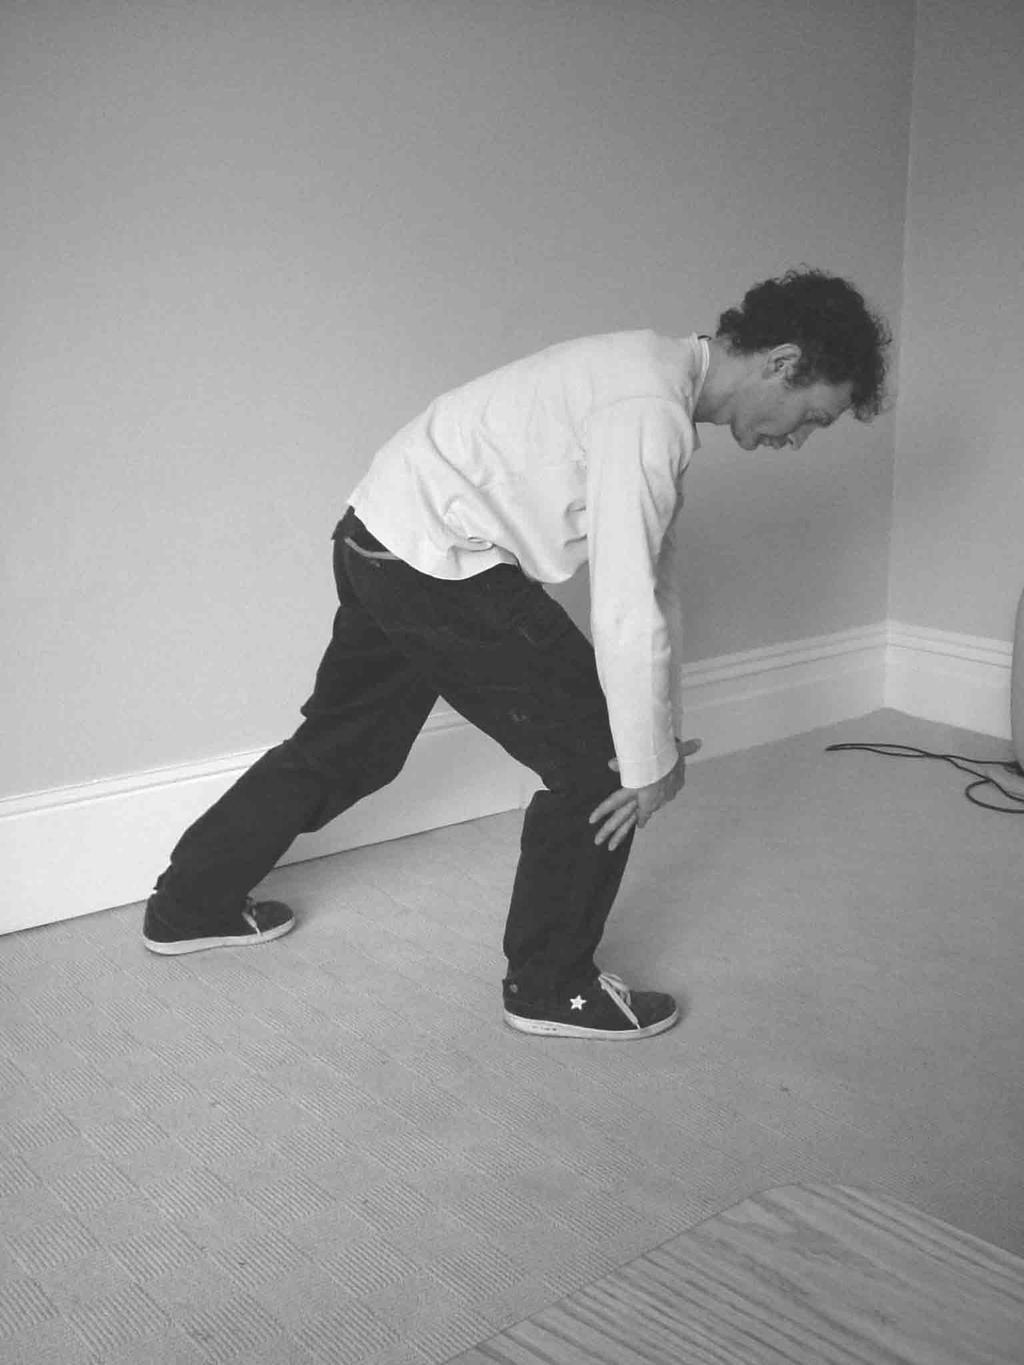 2. Shift your weight towards the front (right) leg. As you do so, lean forwards and downwards, relaxing your arms down in front of you until they cross over just below your (right) knee.